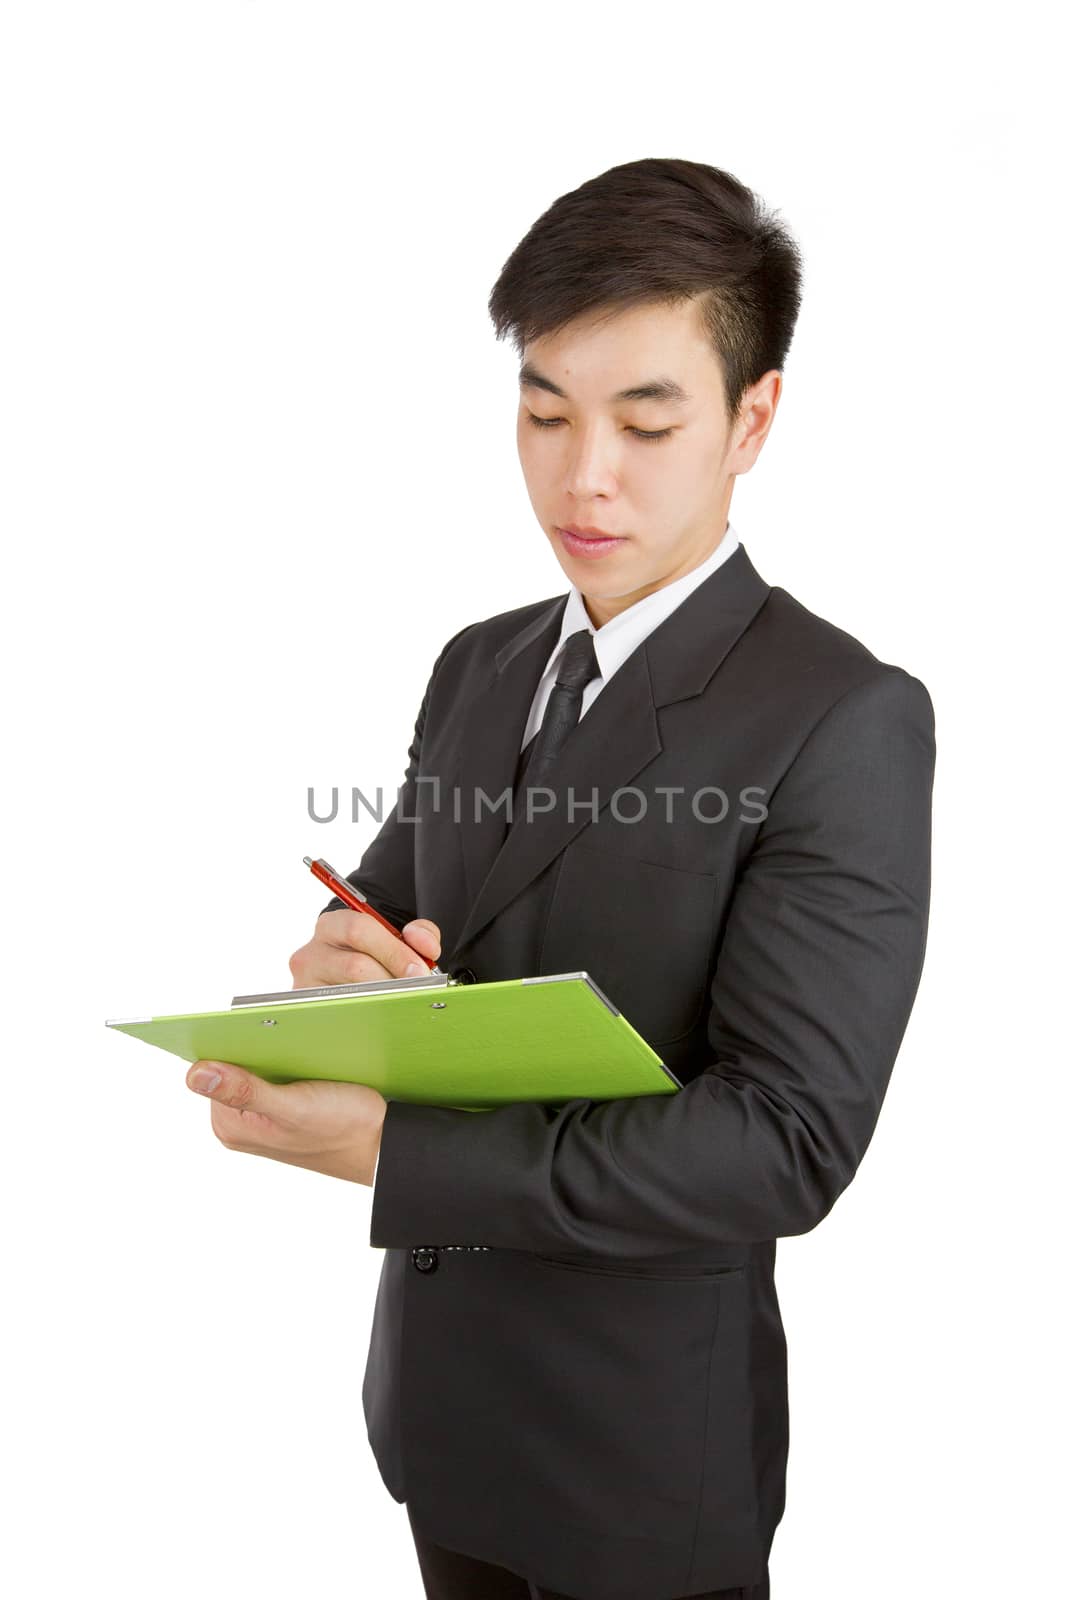 Young Businessman writing note and lecture on green clipboard against a white background.